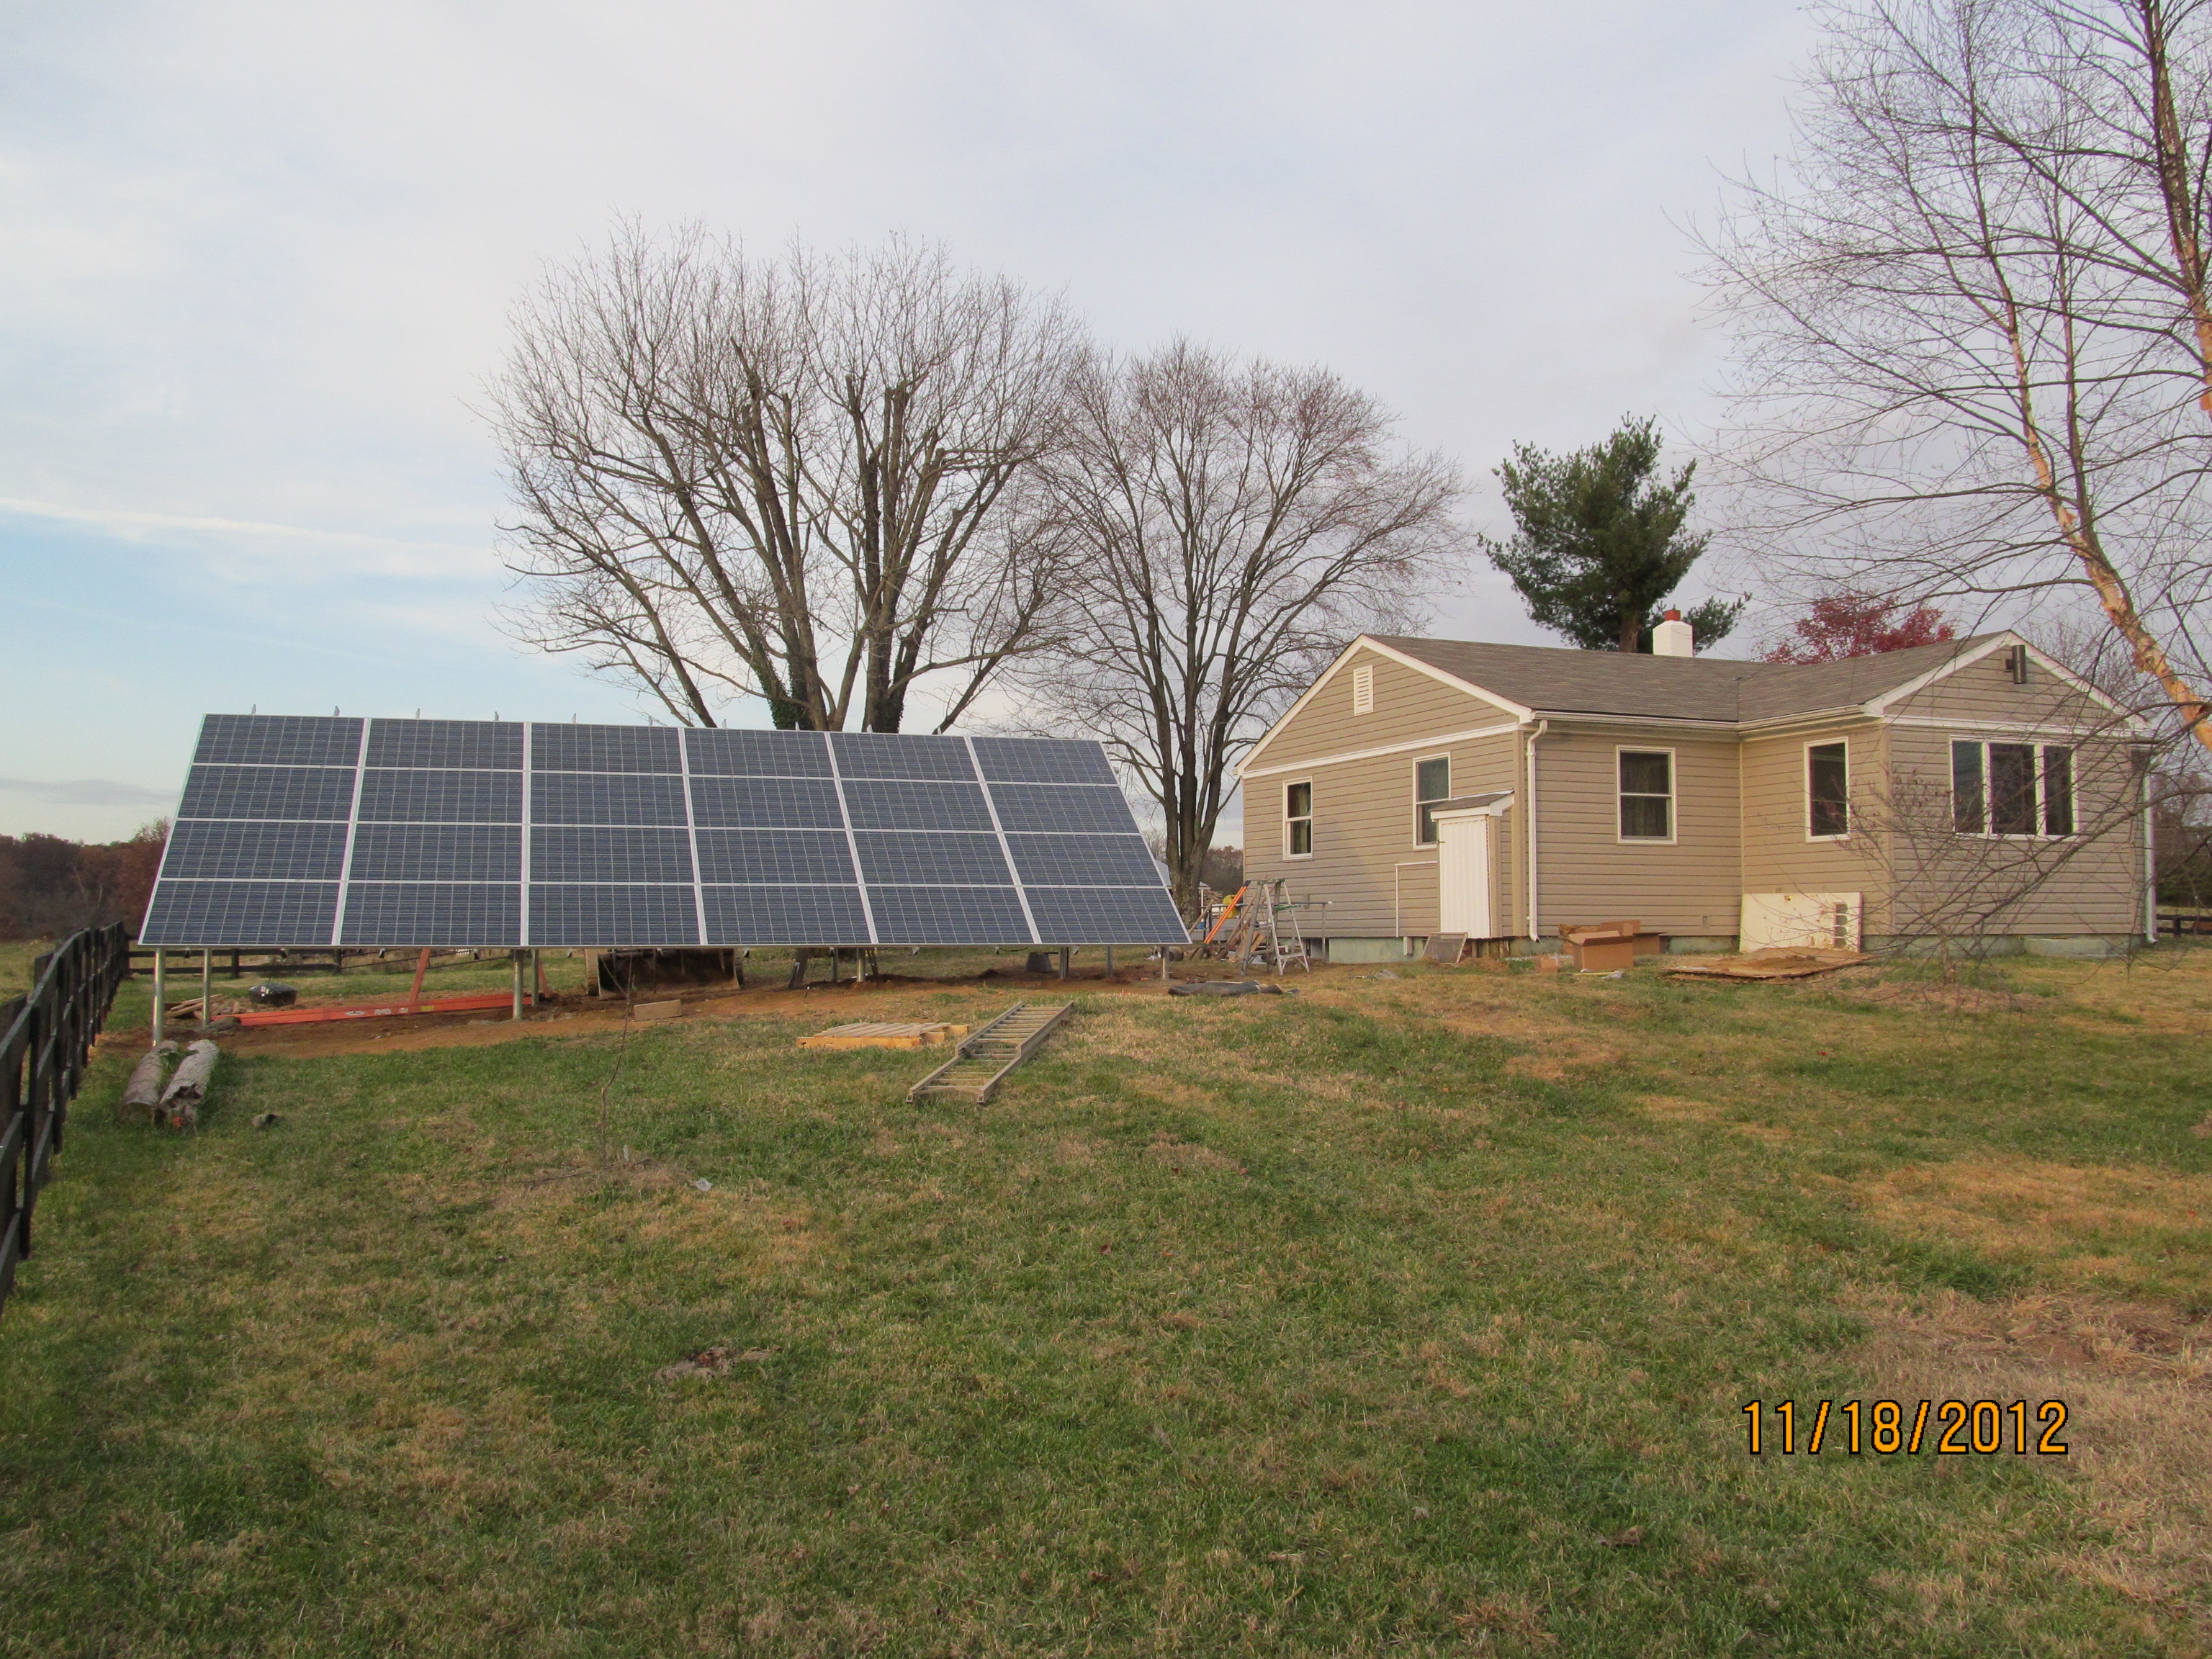  DIY solar array accomplished with a little help from Cinci Home Solar